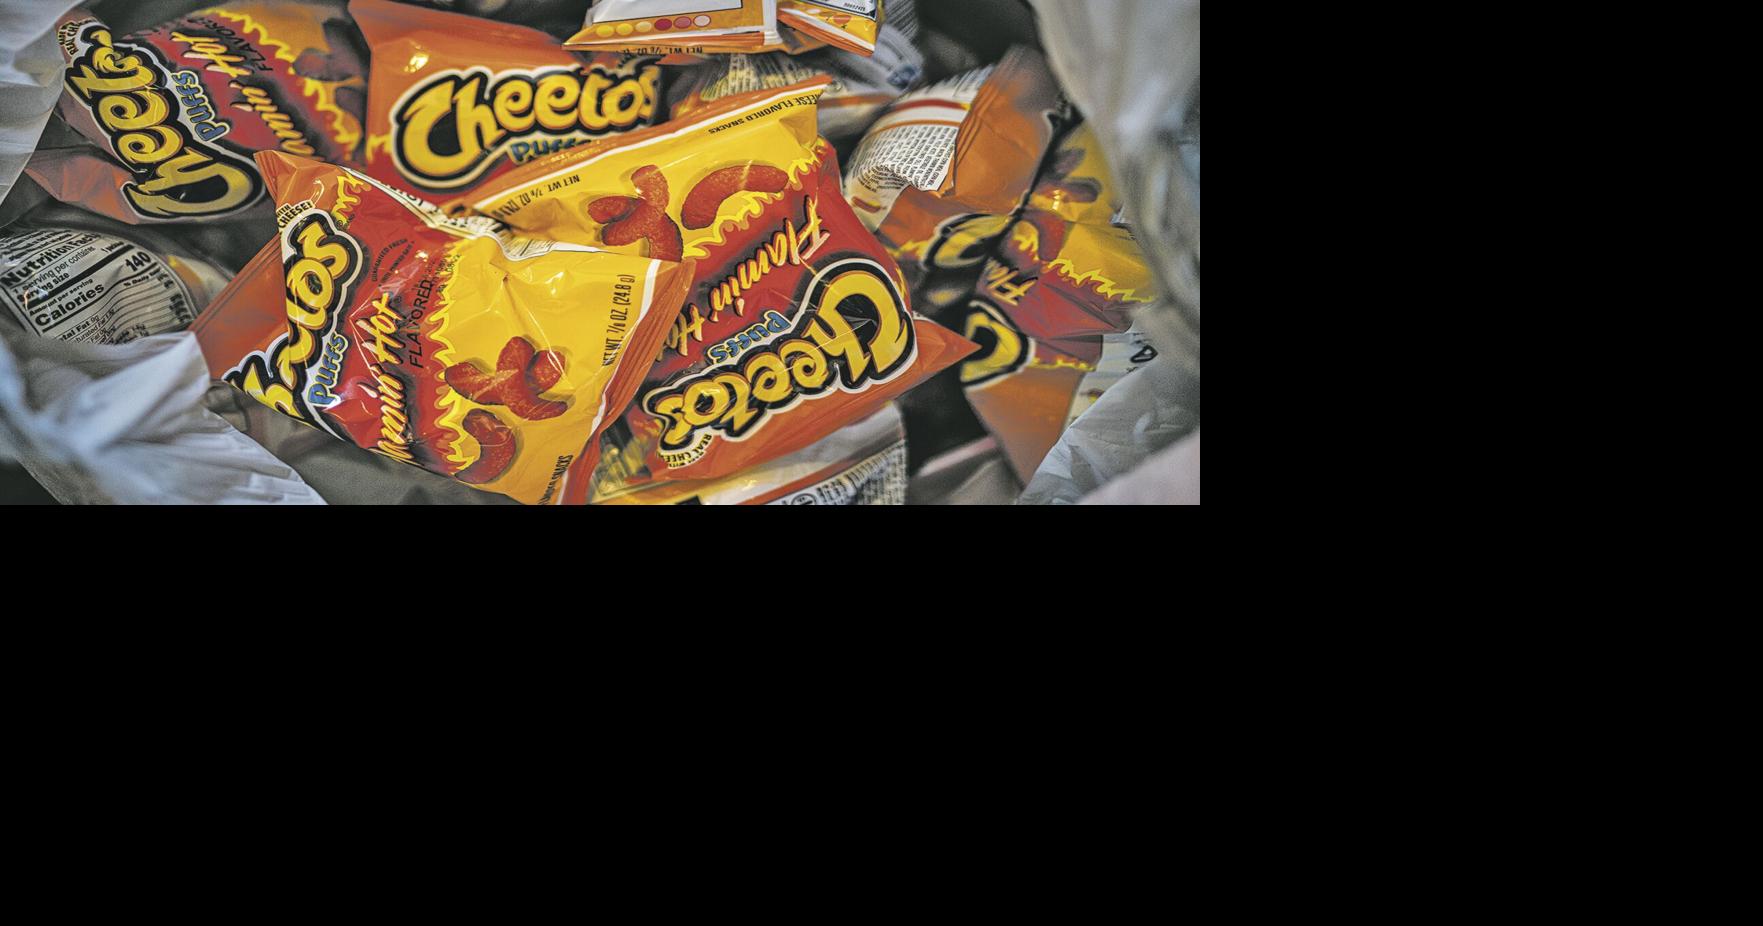 Remember the old hot Cheetos package!